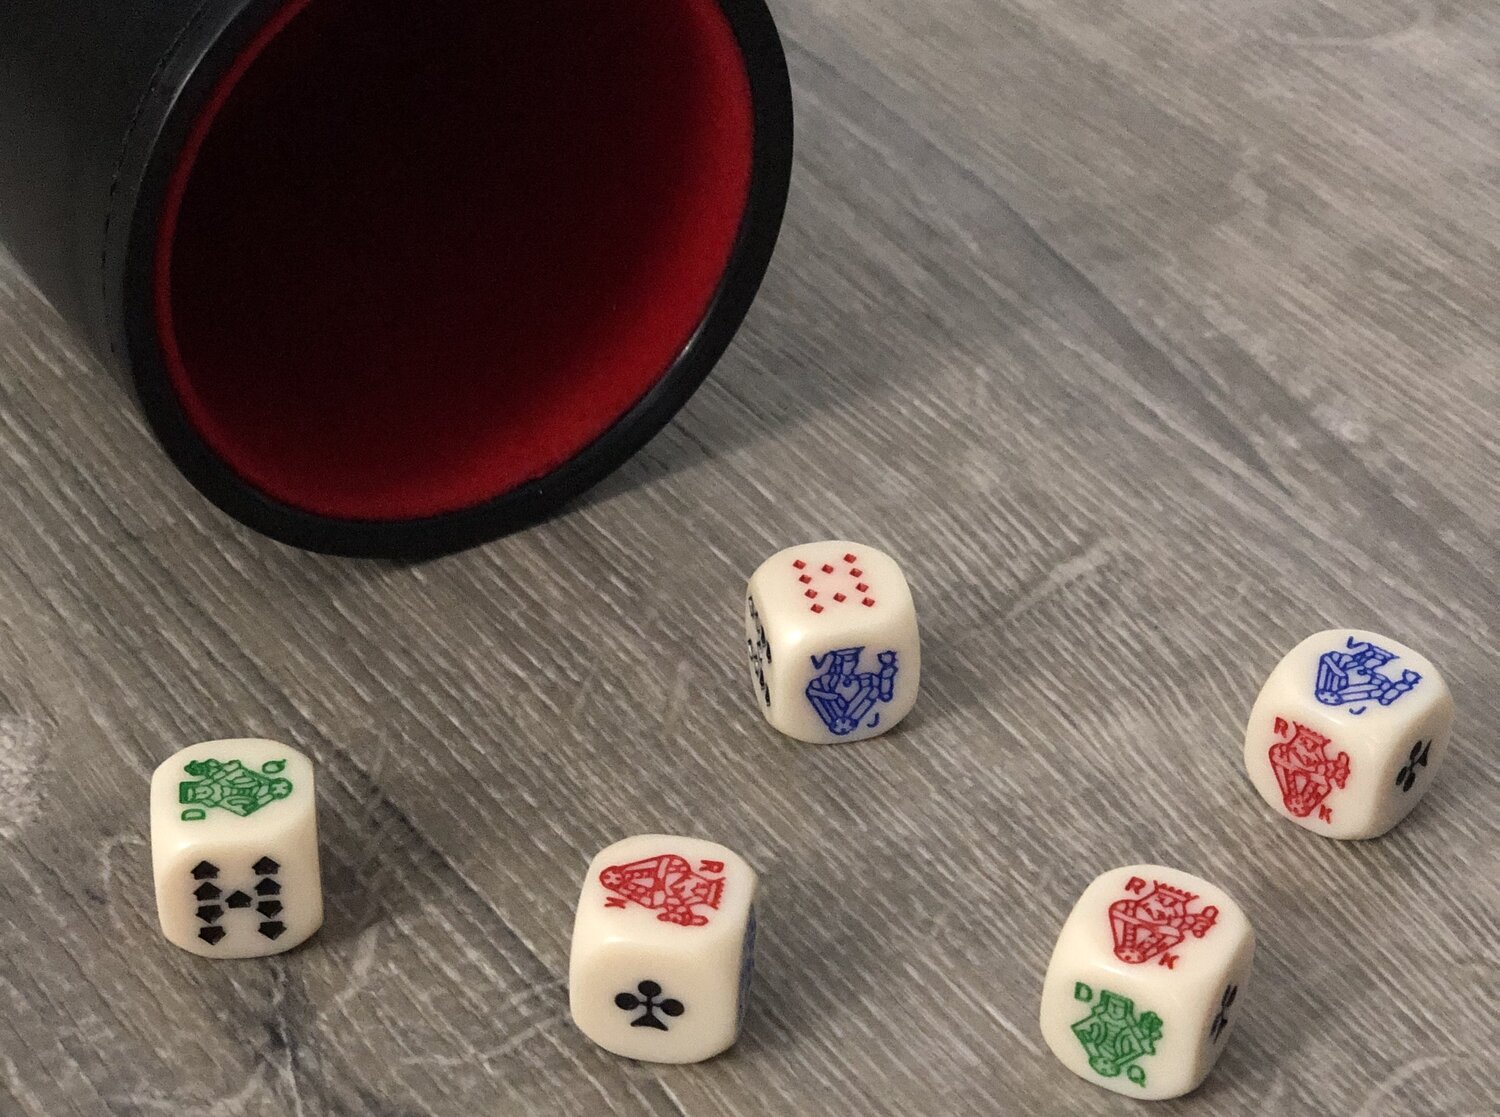 How to Score Big in Poker Dice?